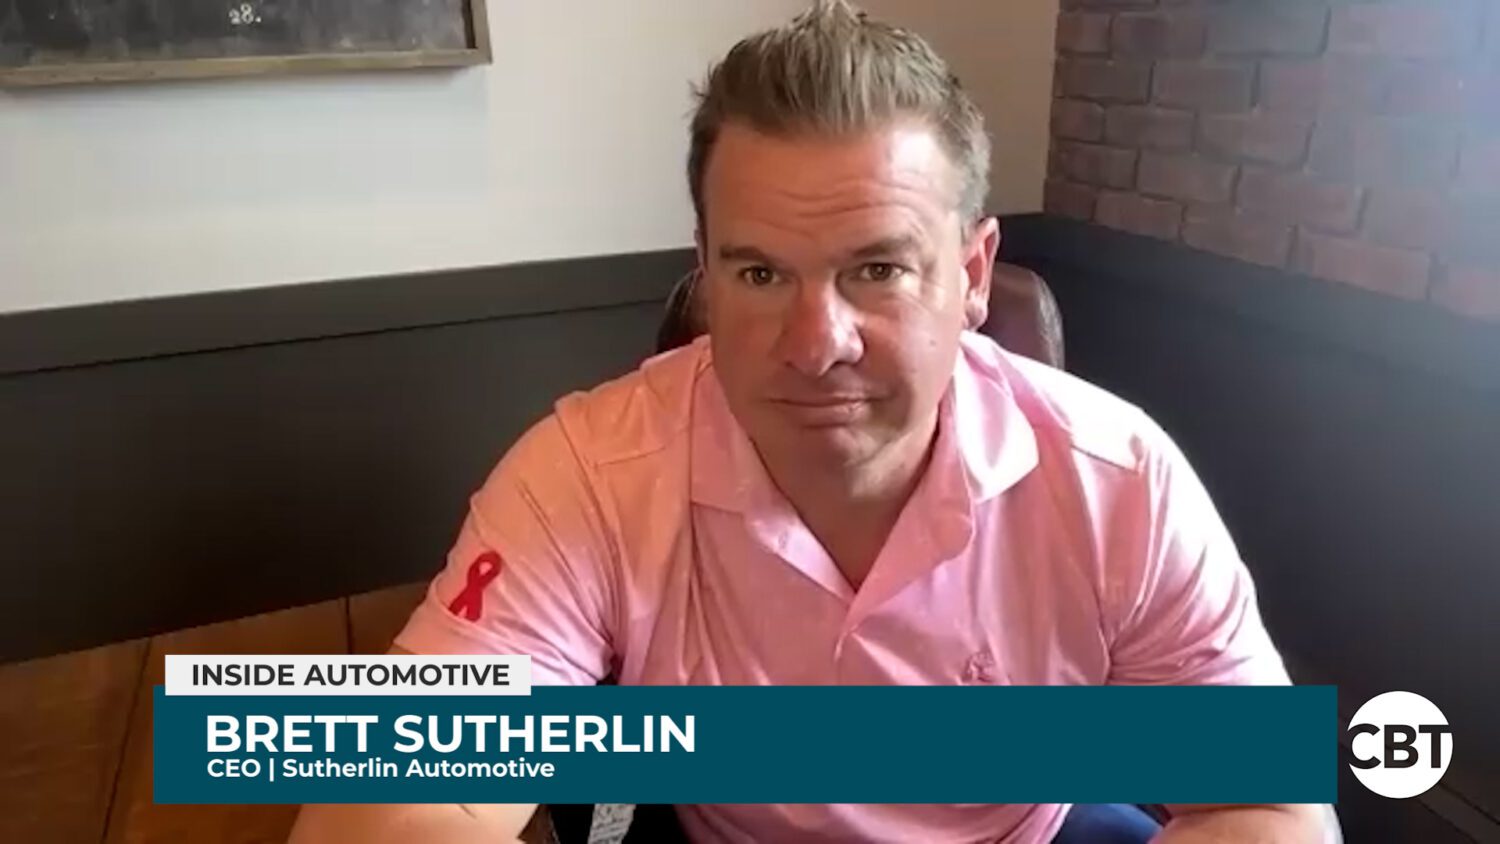 Today on Inside Automotive, we’re pleased to welcome Sutherlin Automotive CEO, Brett Sutherlin, to tell us about the group's latest deals.